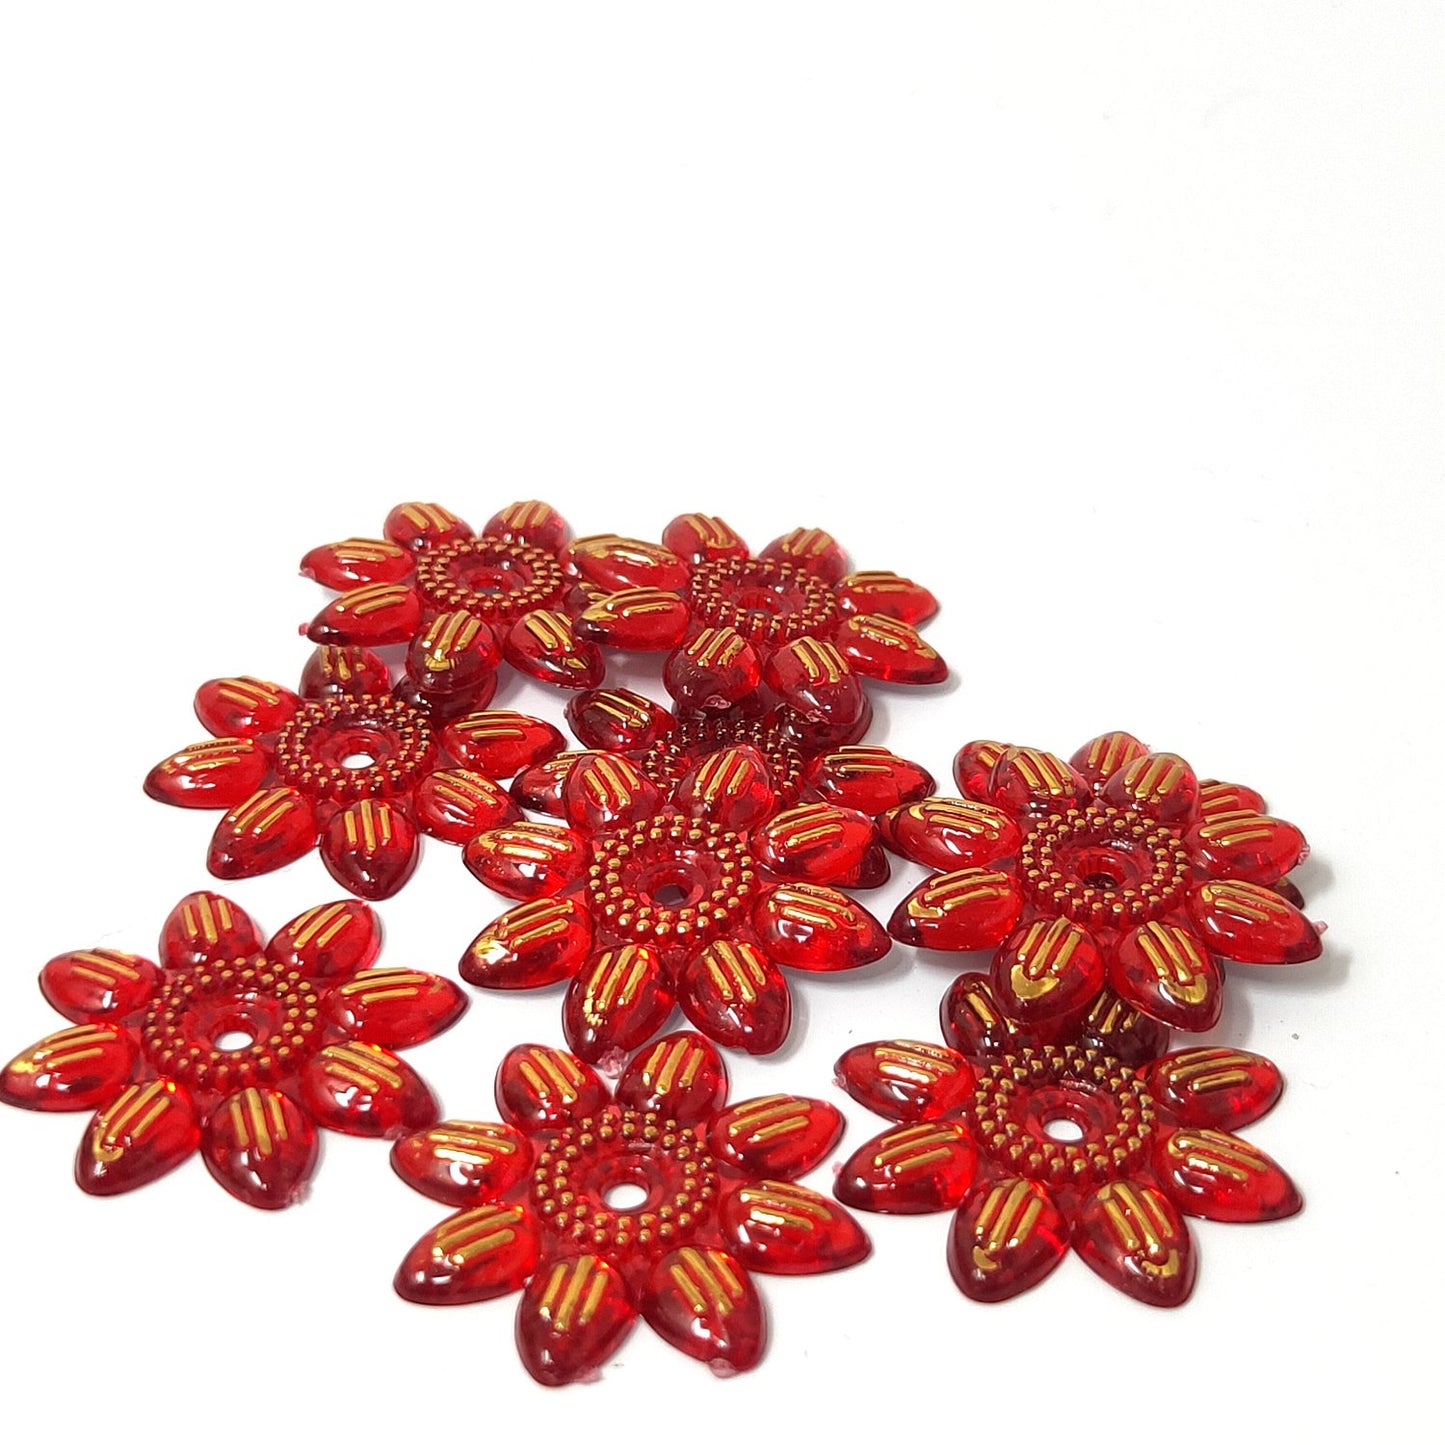 25 mm Plastic Floral Beads for Jewellery Making and Decoration (10 Beads) - 96-11